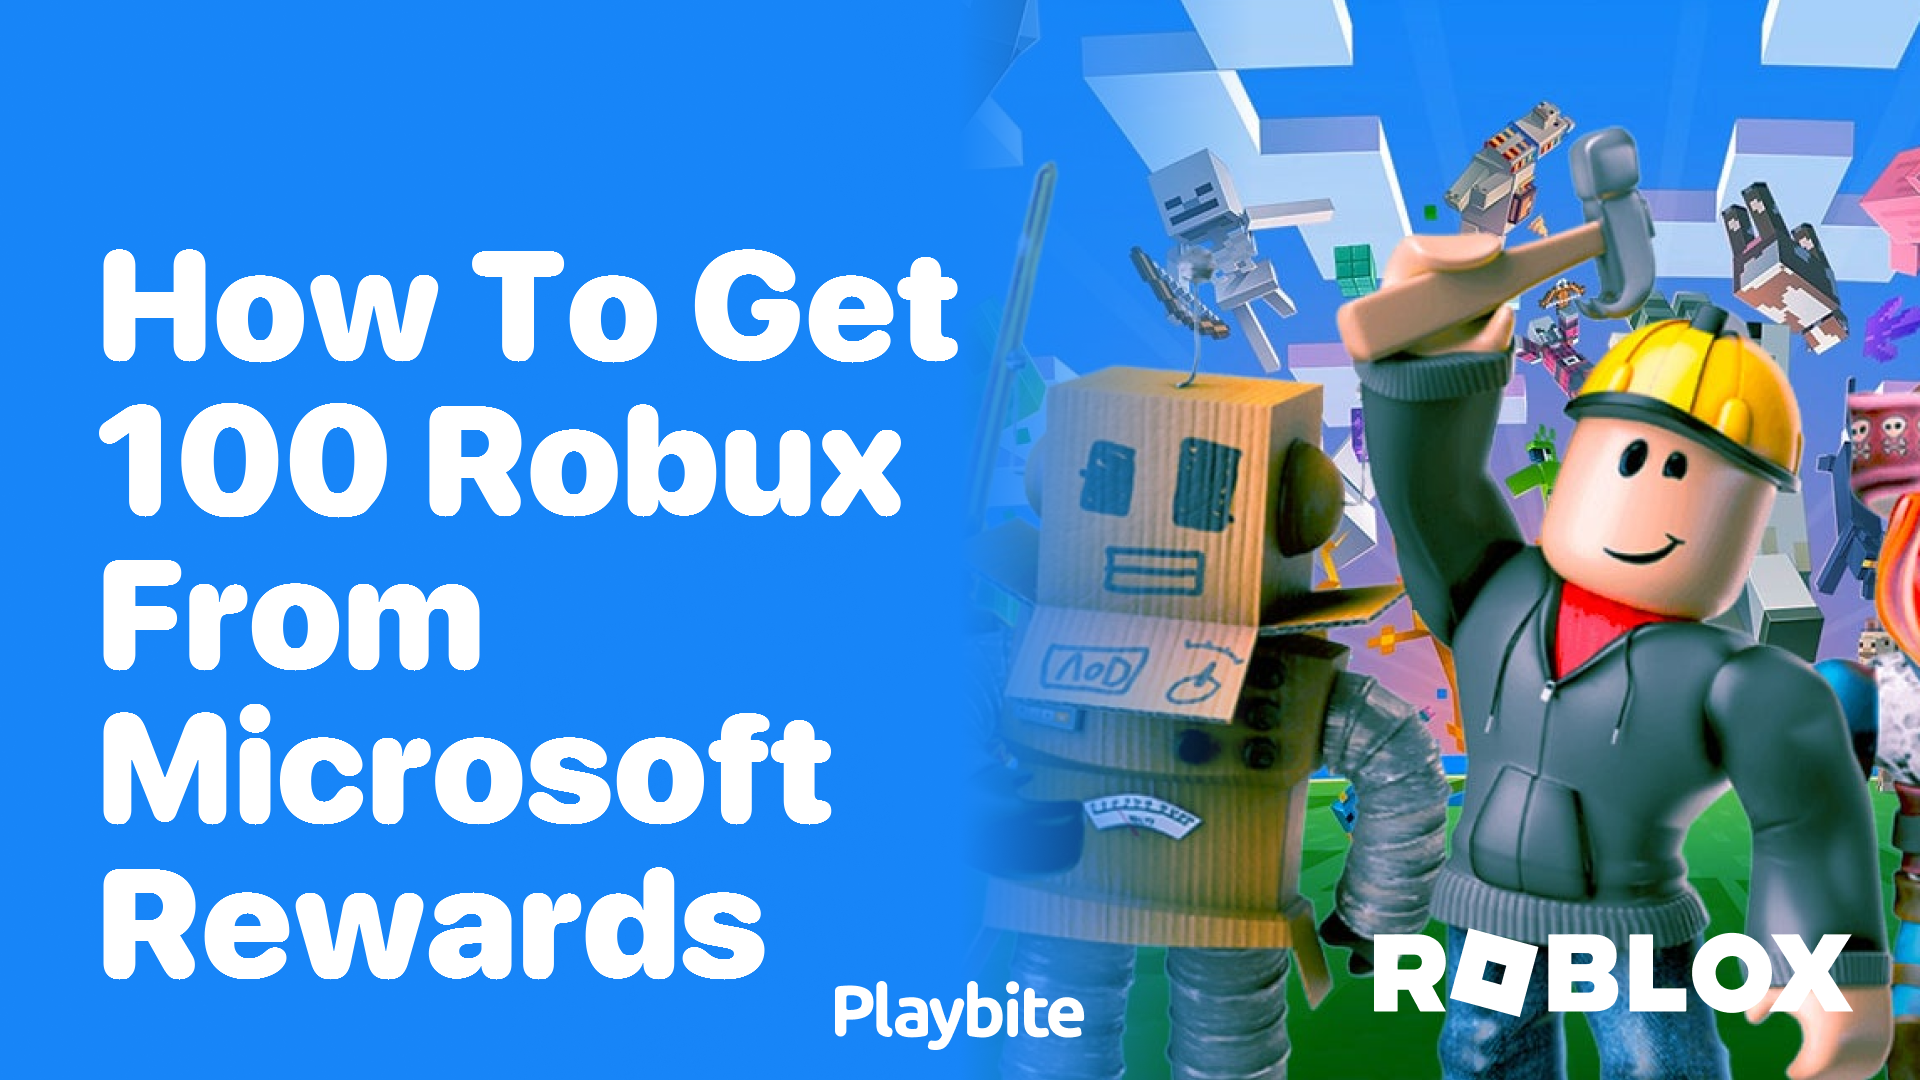 How to Get 100 Robux from Microsoft Rewards